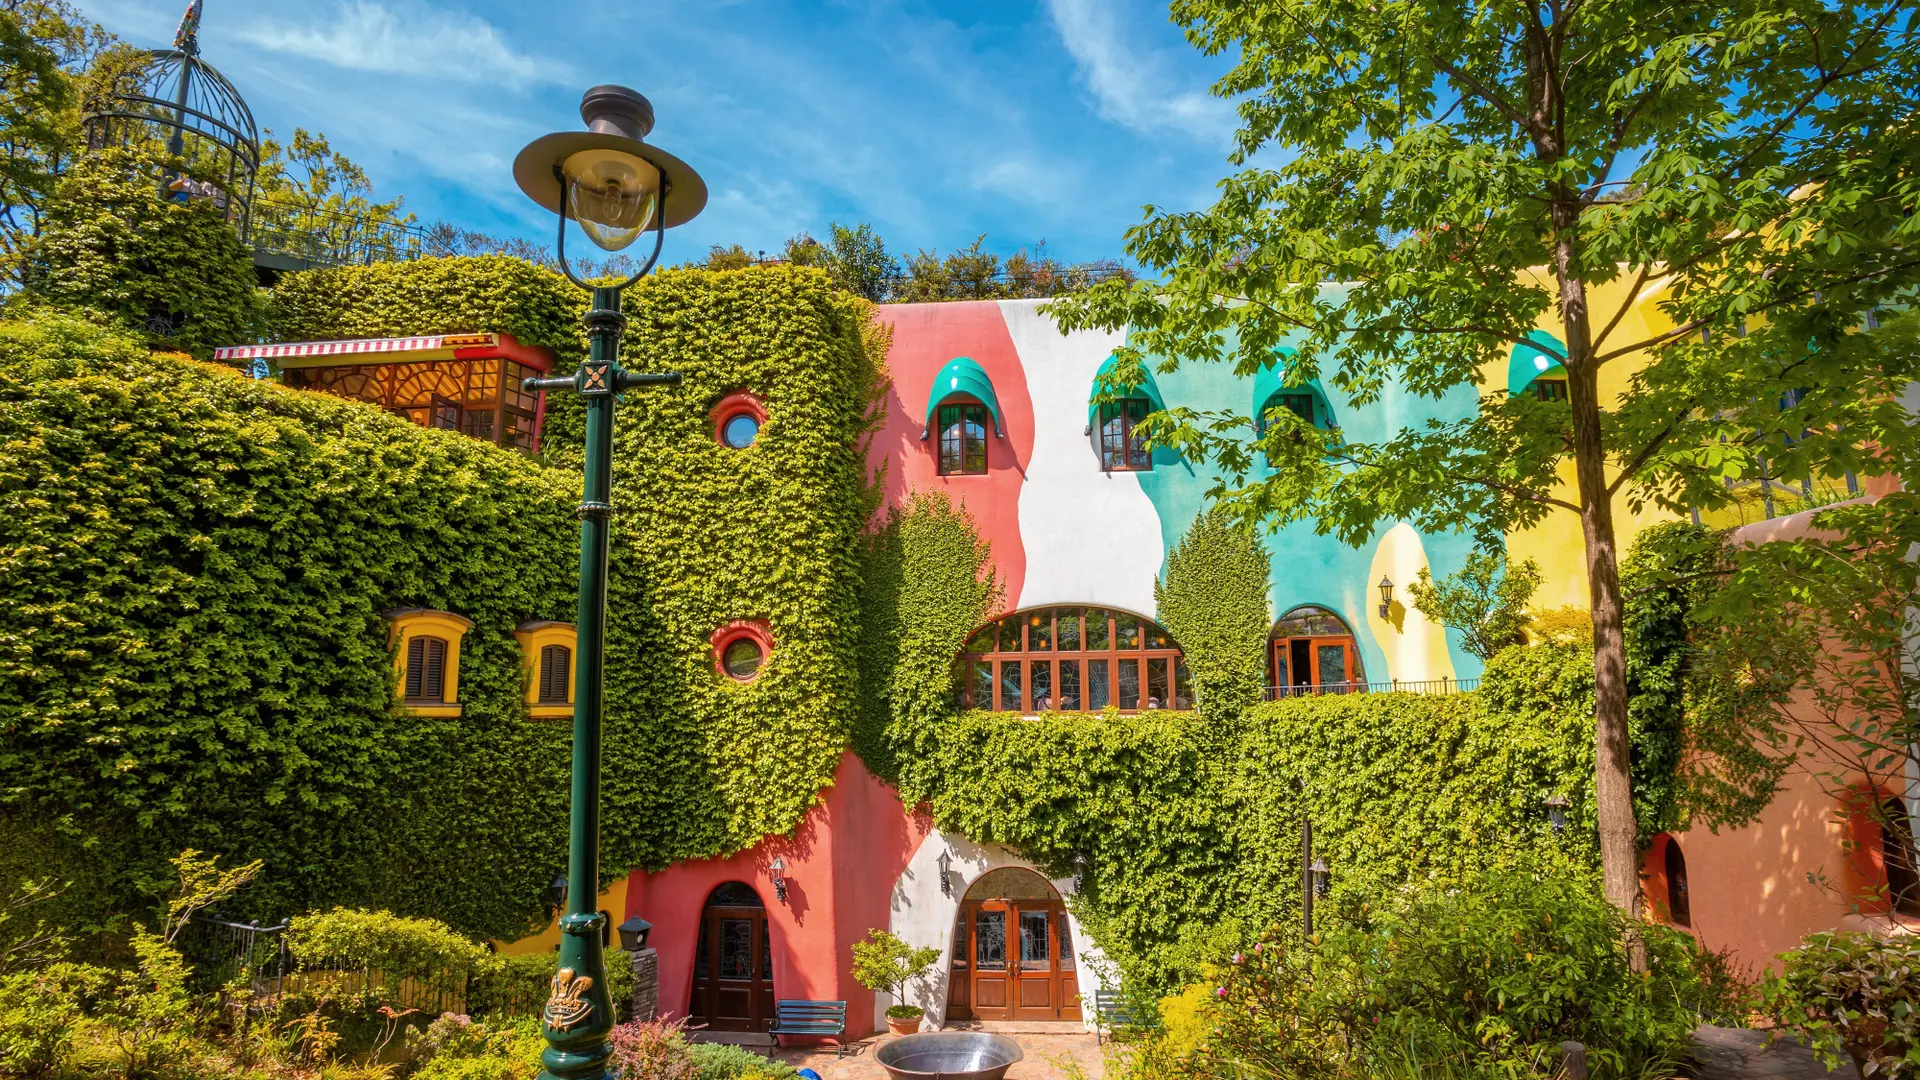 Pink, white, pastel blue and yellow building with bushes covering 50% at Ghibli Museum.